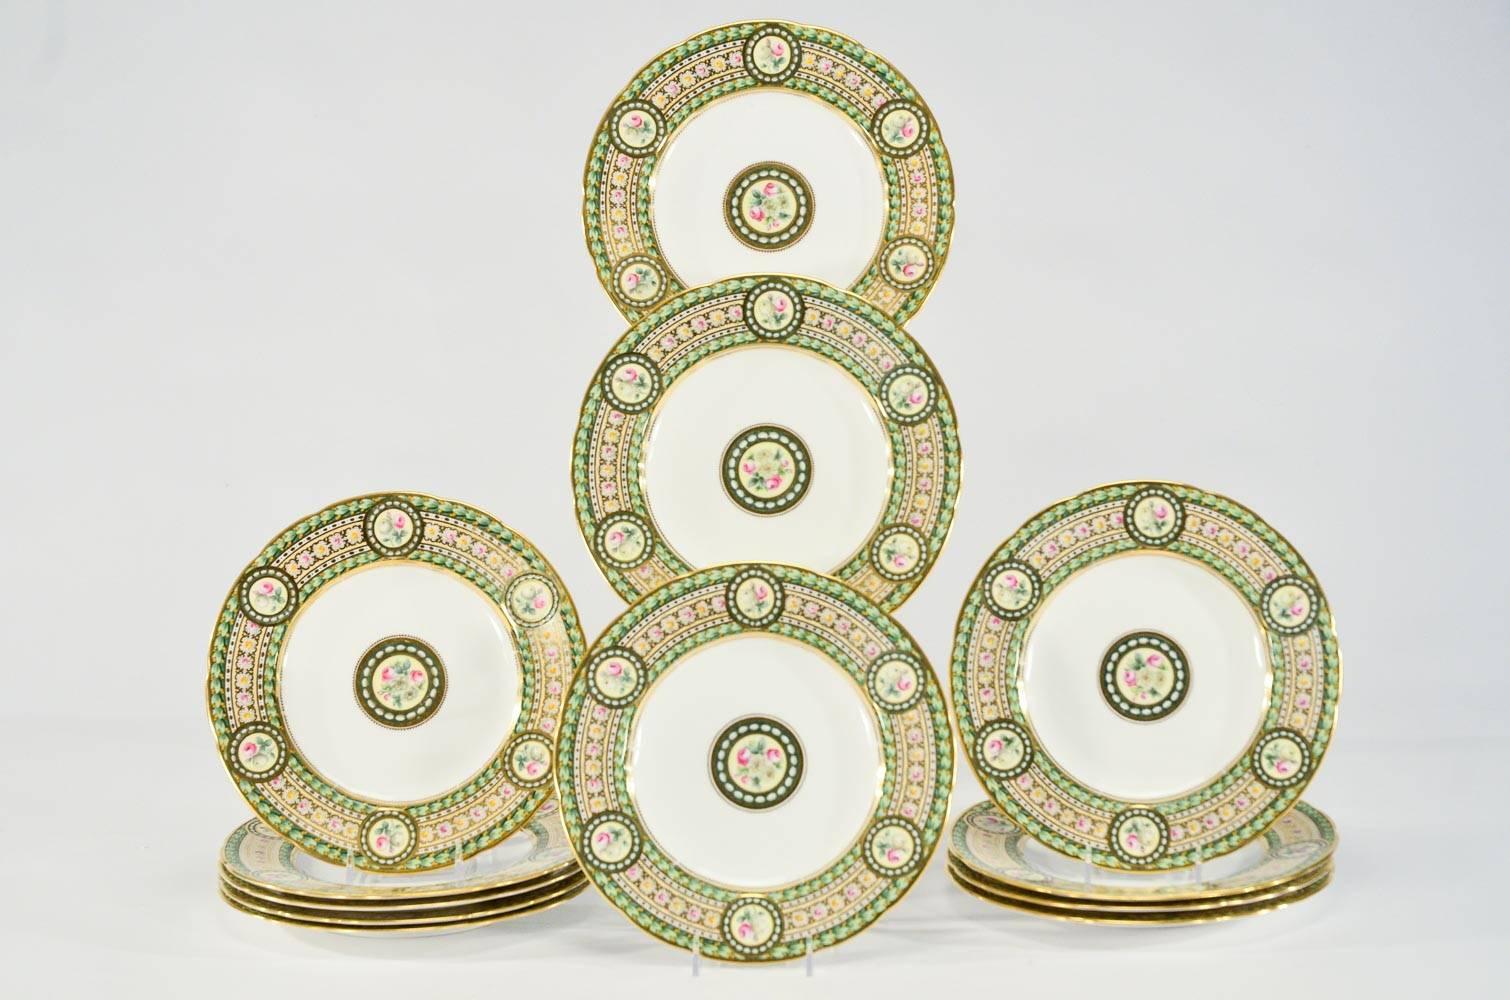 Early 20th Century Set of 12 Copeland's 19th C Hand Painted Dessert Plates w/ Roses & Leaves